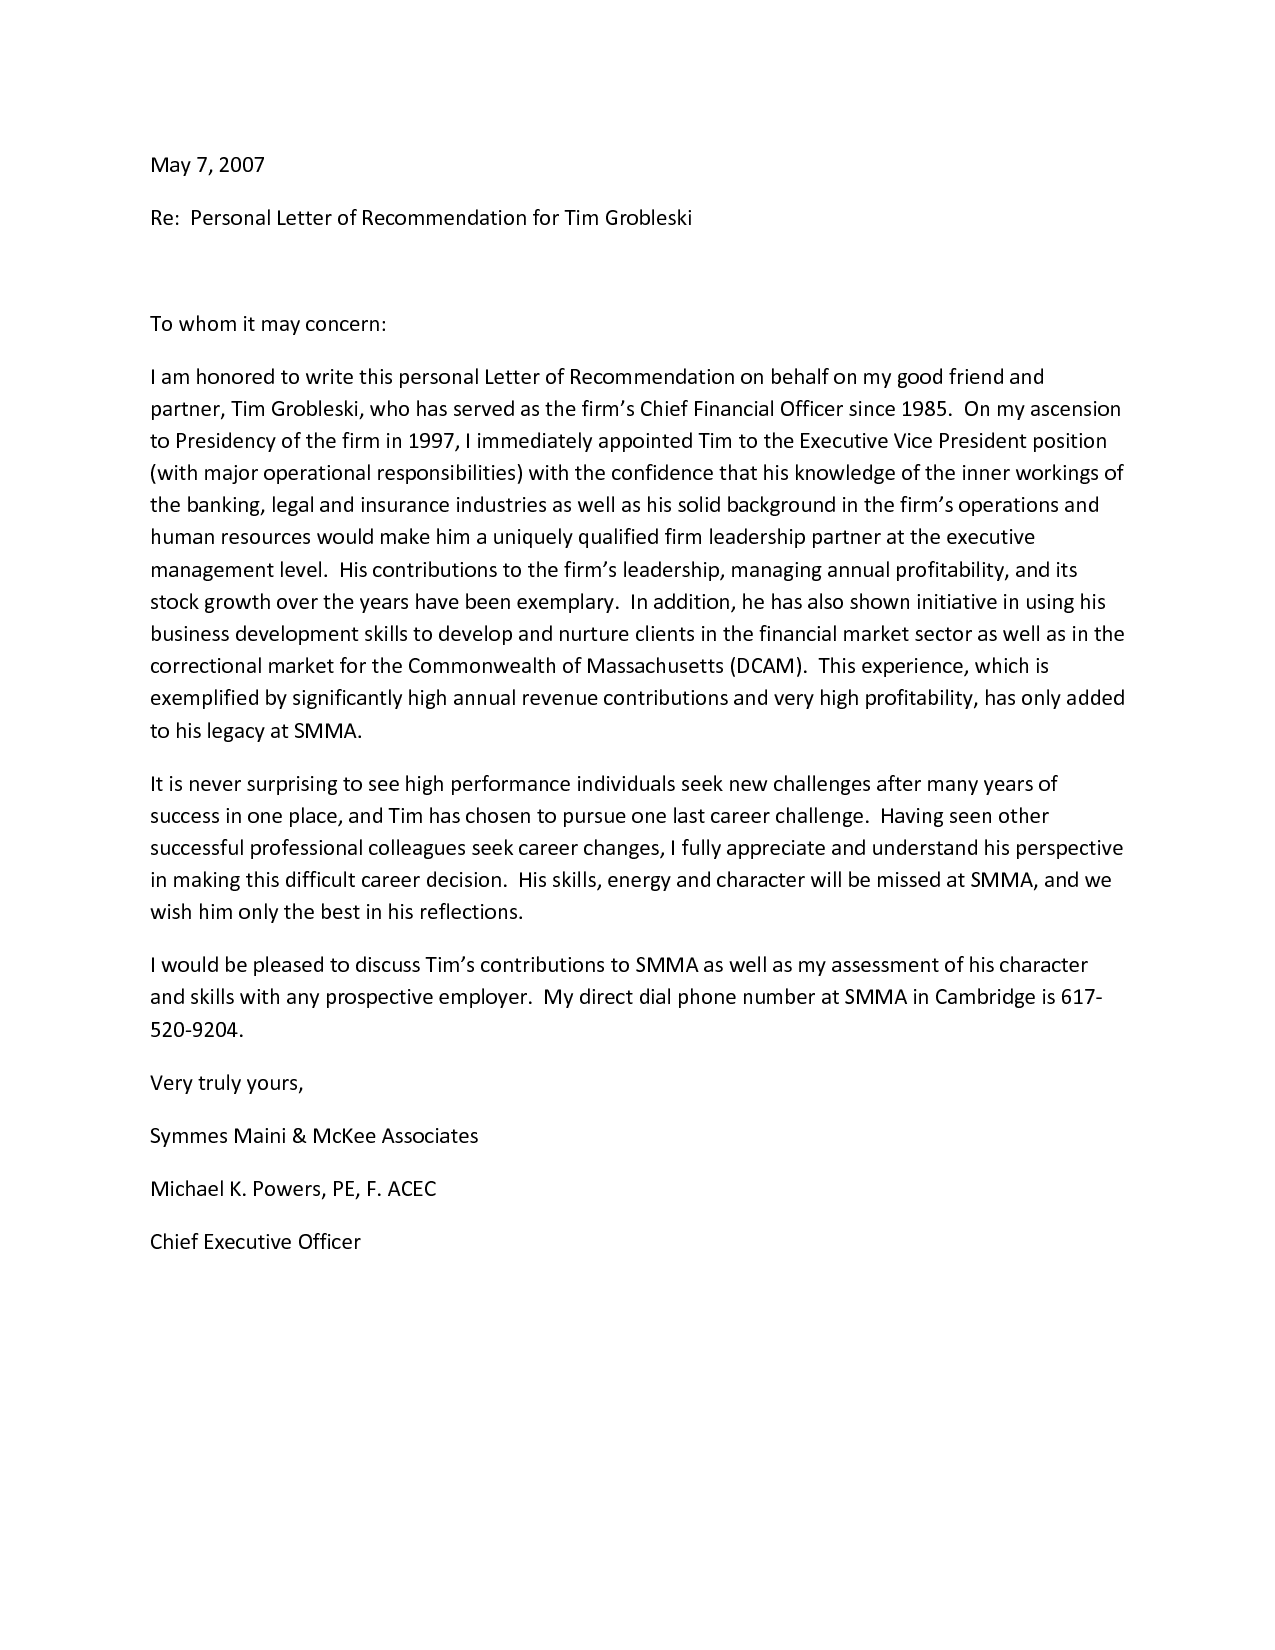 Free Personal Letter of Recommendation Template (For a Friend 